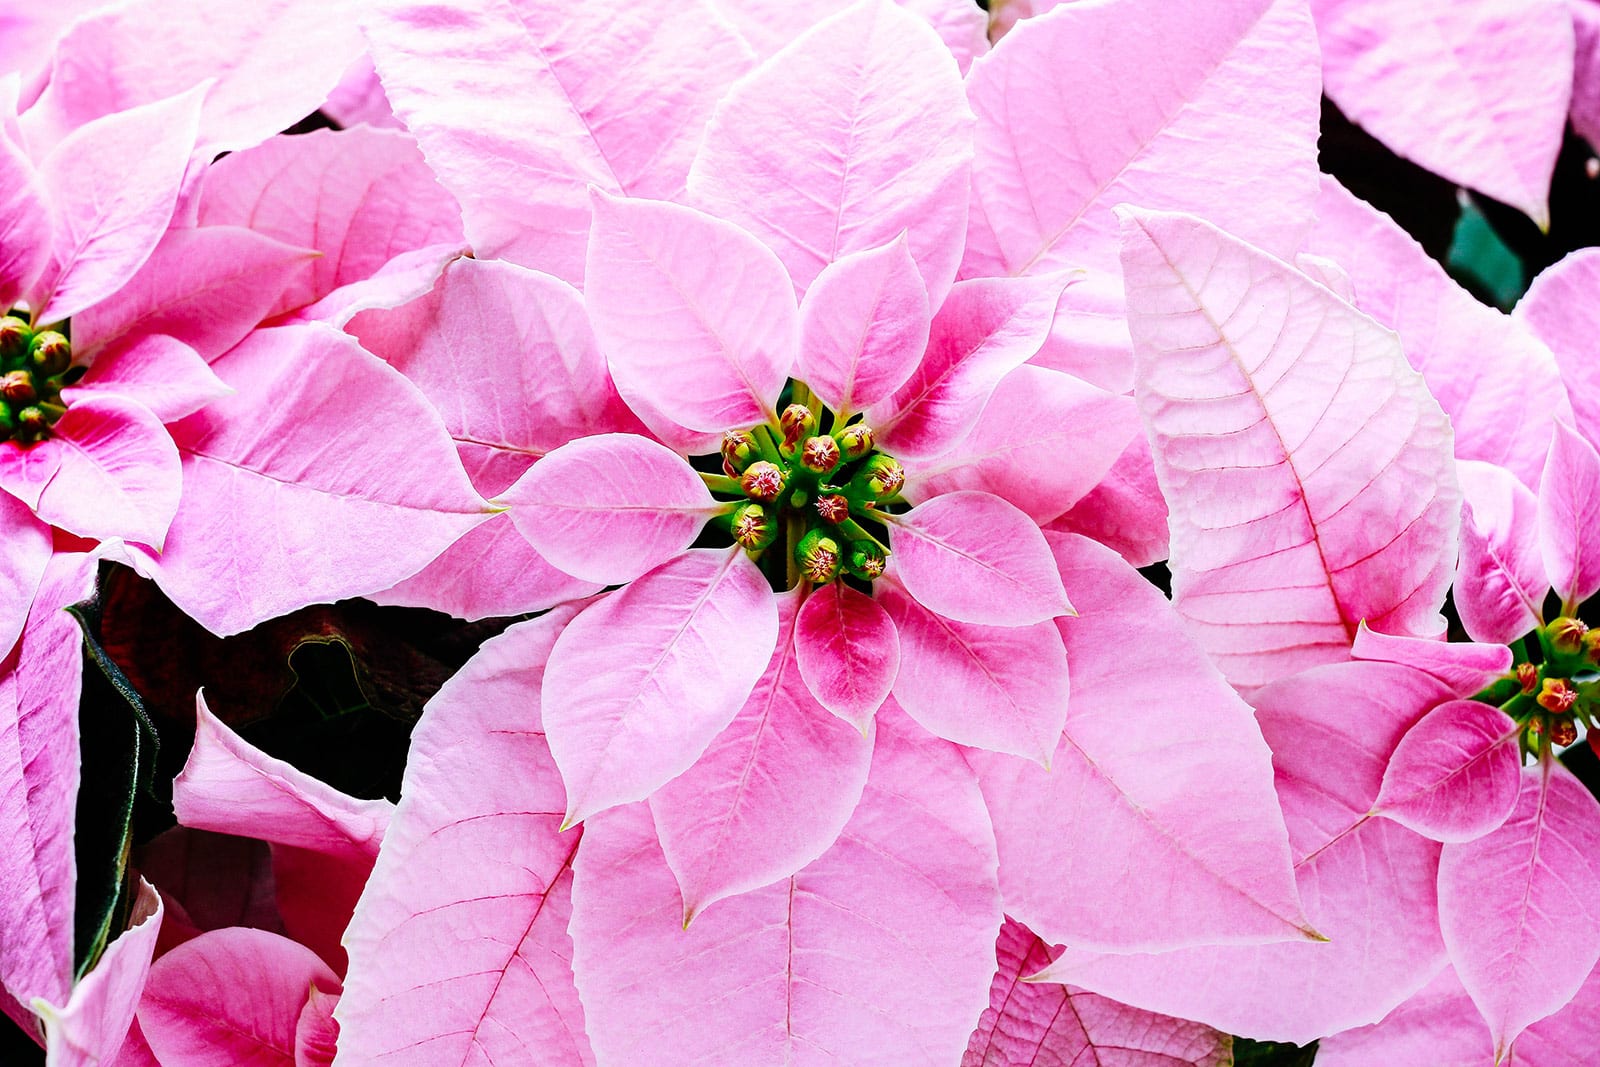 Bright pink poinsettia in bloom